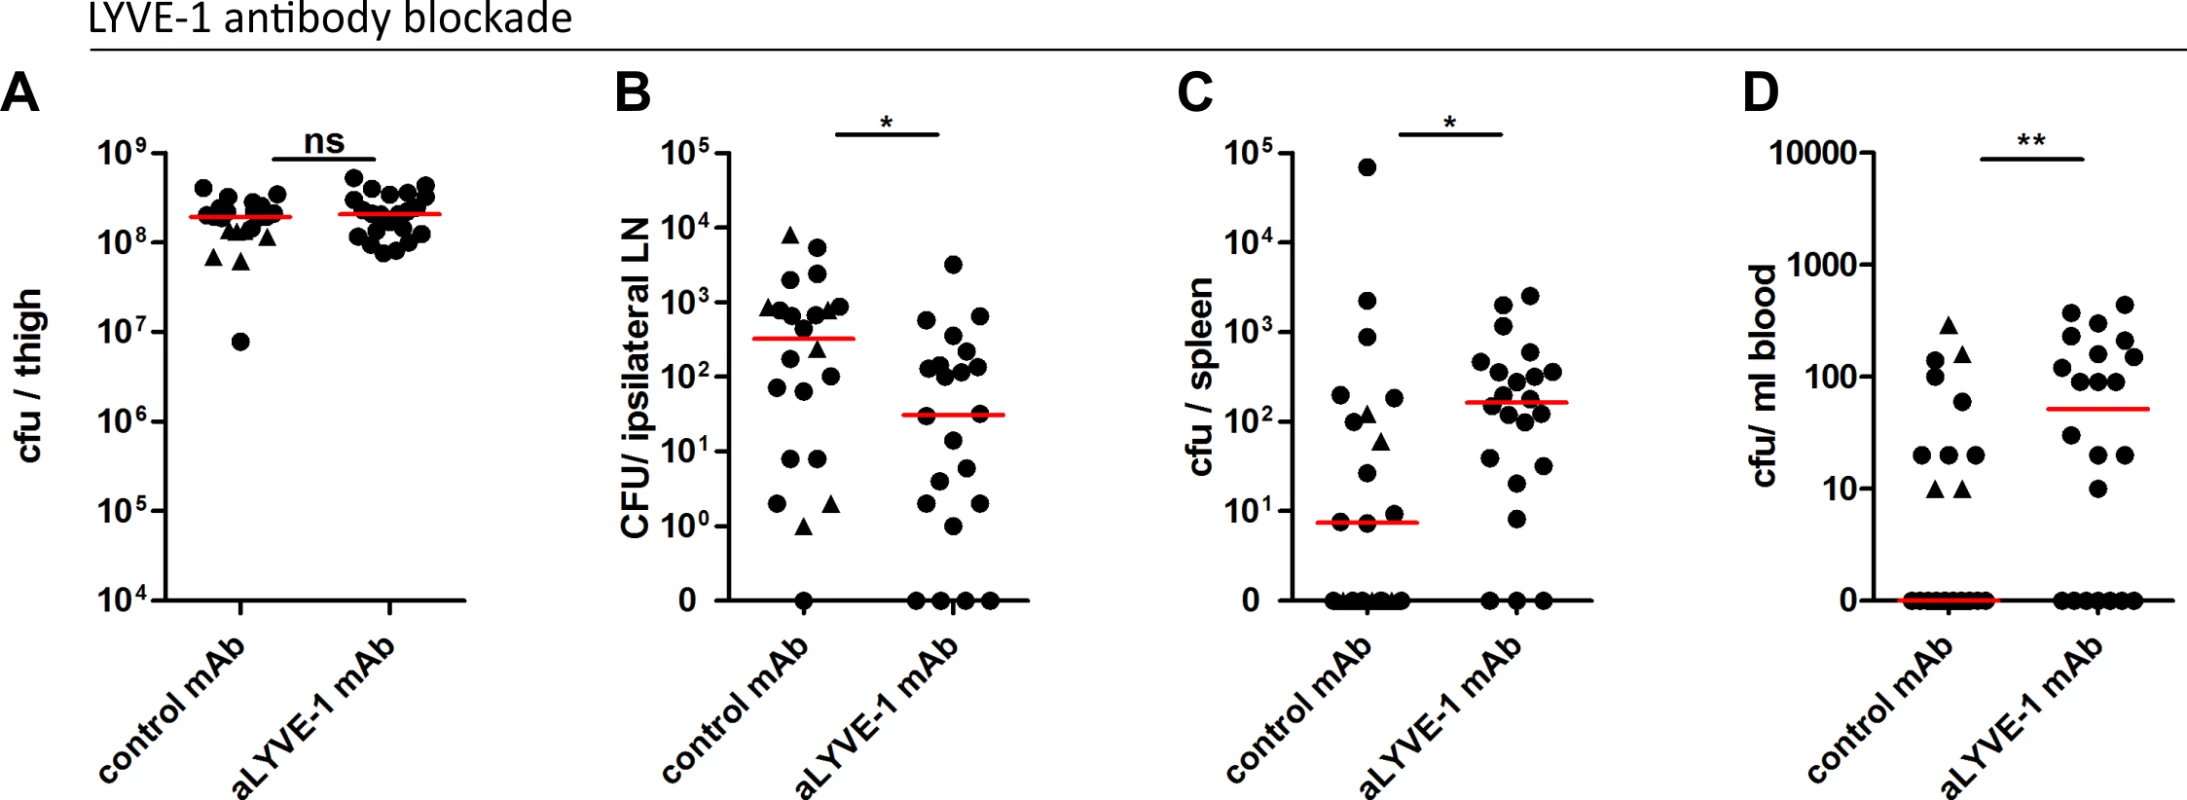 LYVE-1 functional blockade reduces GAS dissemination to draining lymph nodes.